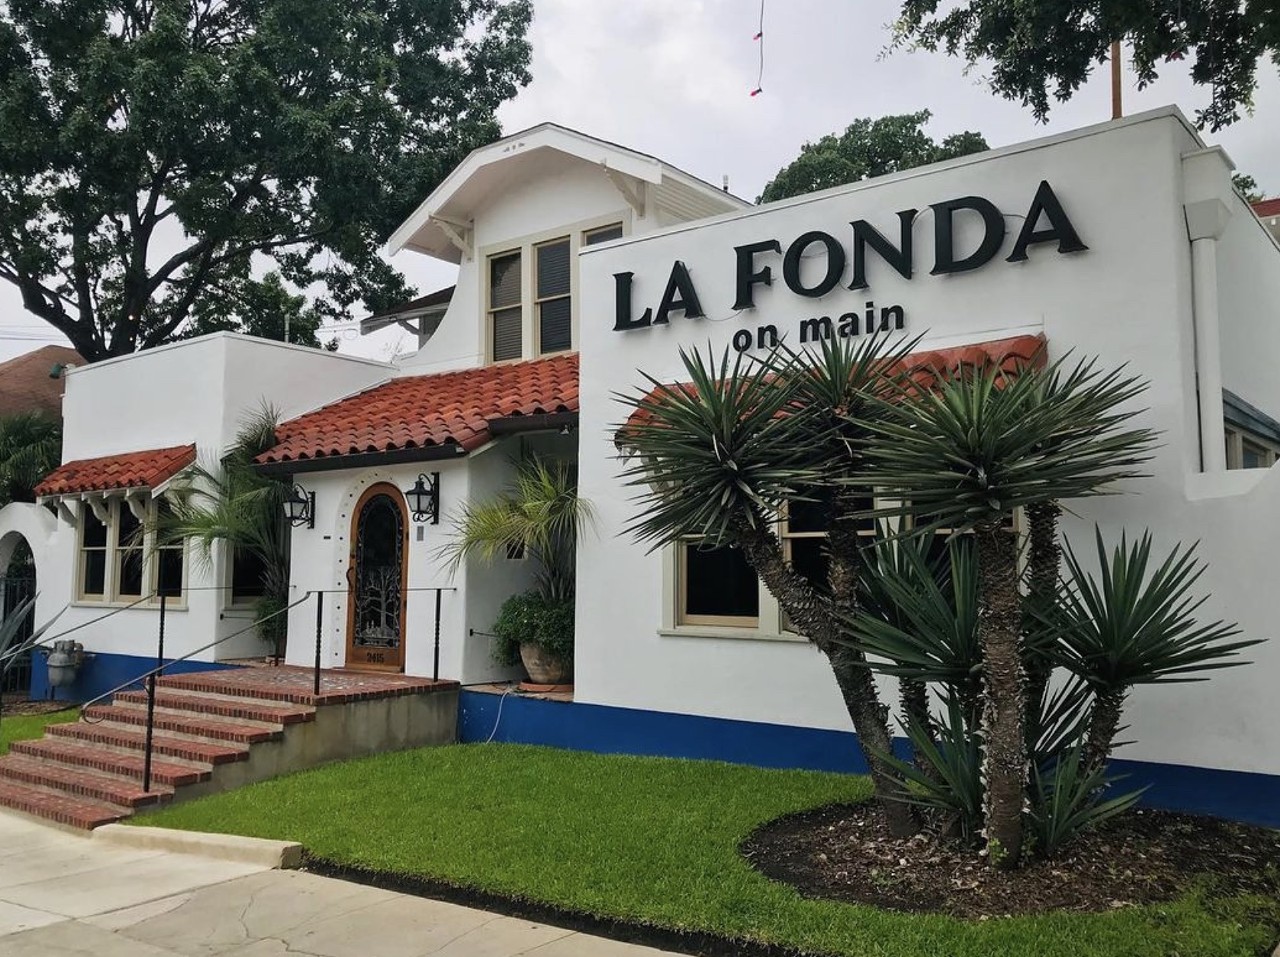 La Fonda on Main, 1932
2415 N. Main Ave., (210) 733-0621, lafondaonmain.com
As the oldest Mexican restaurant in San Antonio, La Fonda serves up delicious dishes in a historic setting. The colorful, casual atmosphere is a vibrant background for the spot’s Mexican fare.